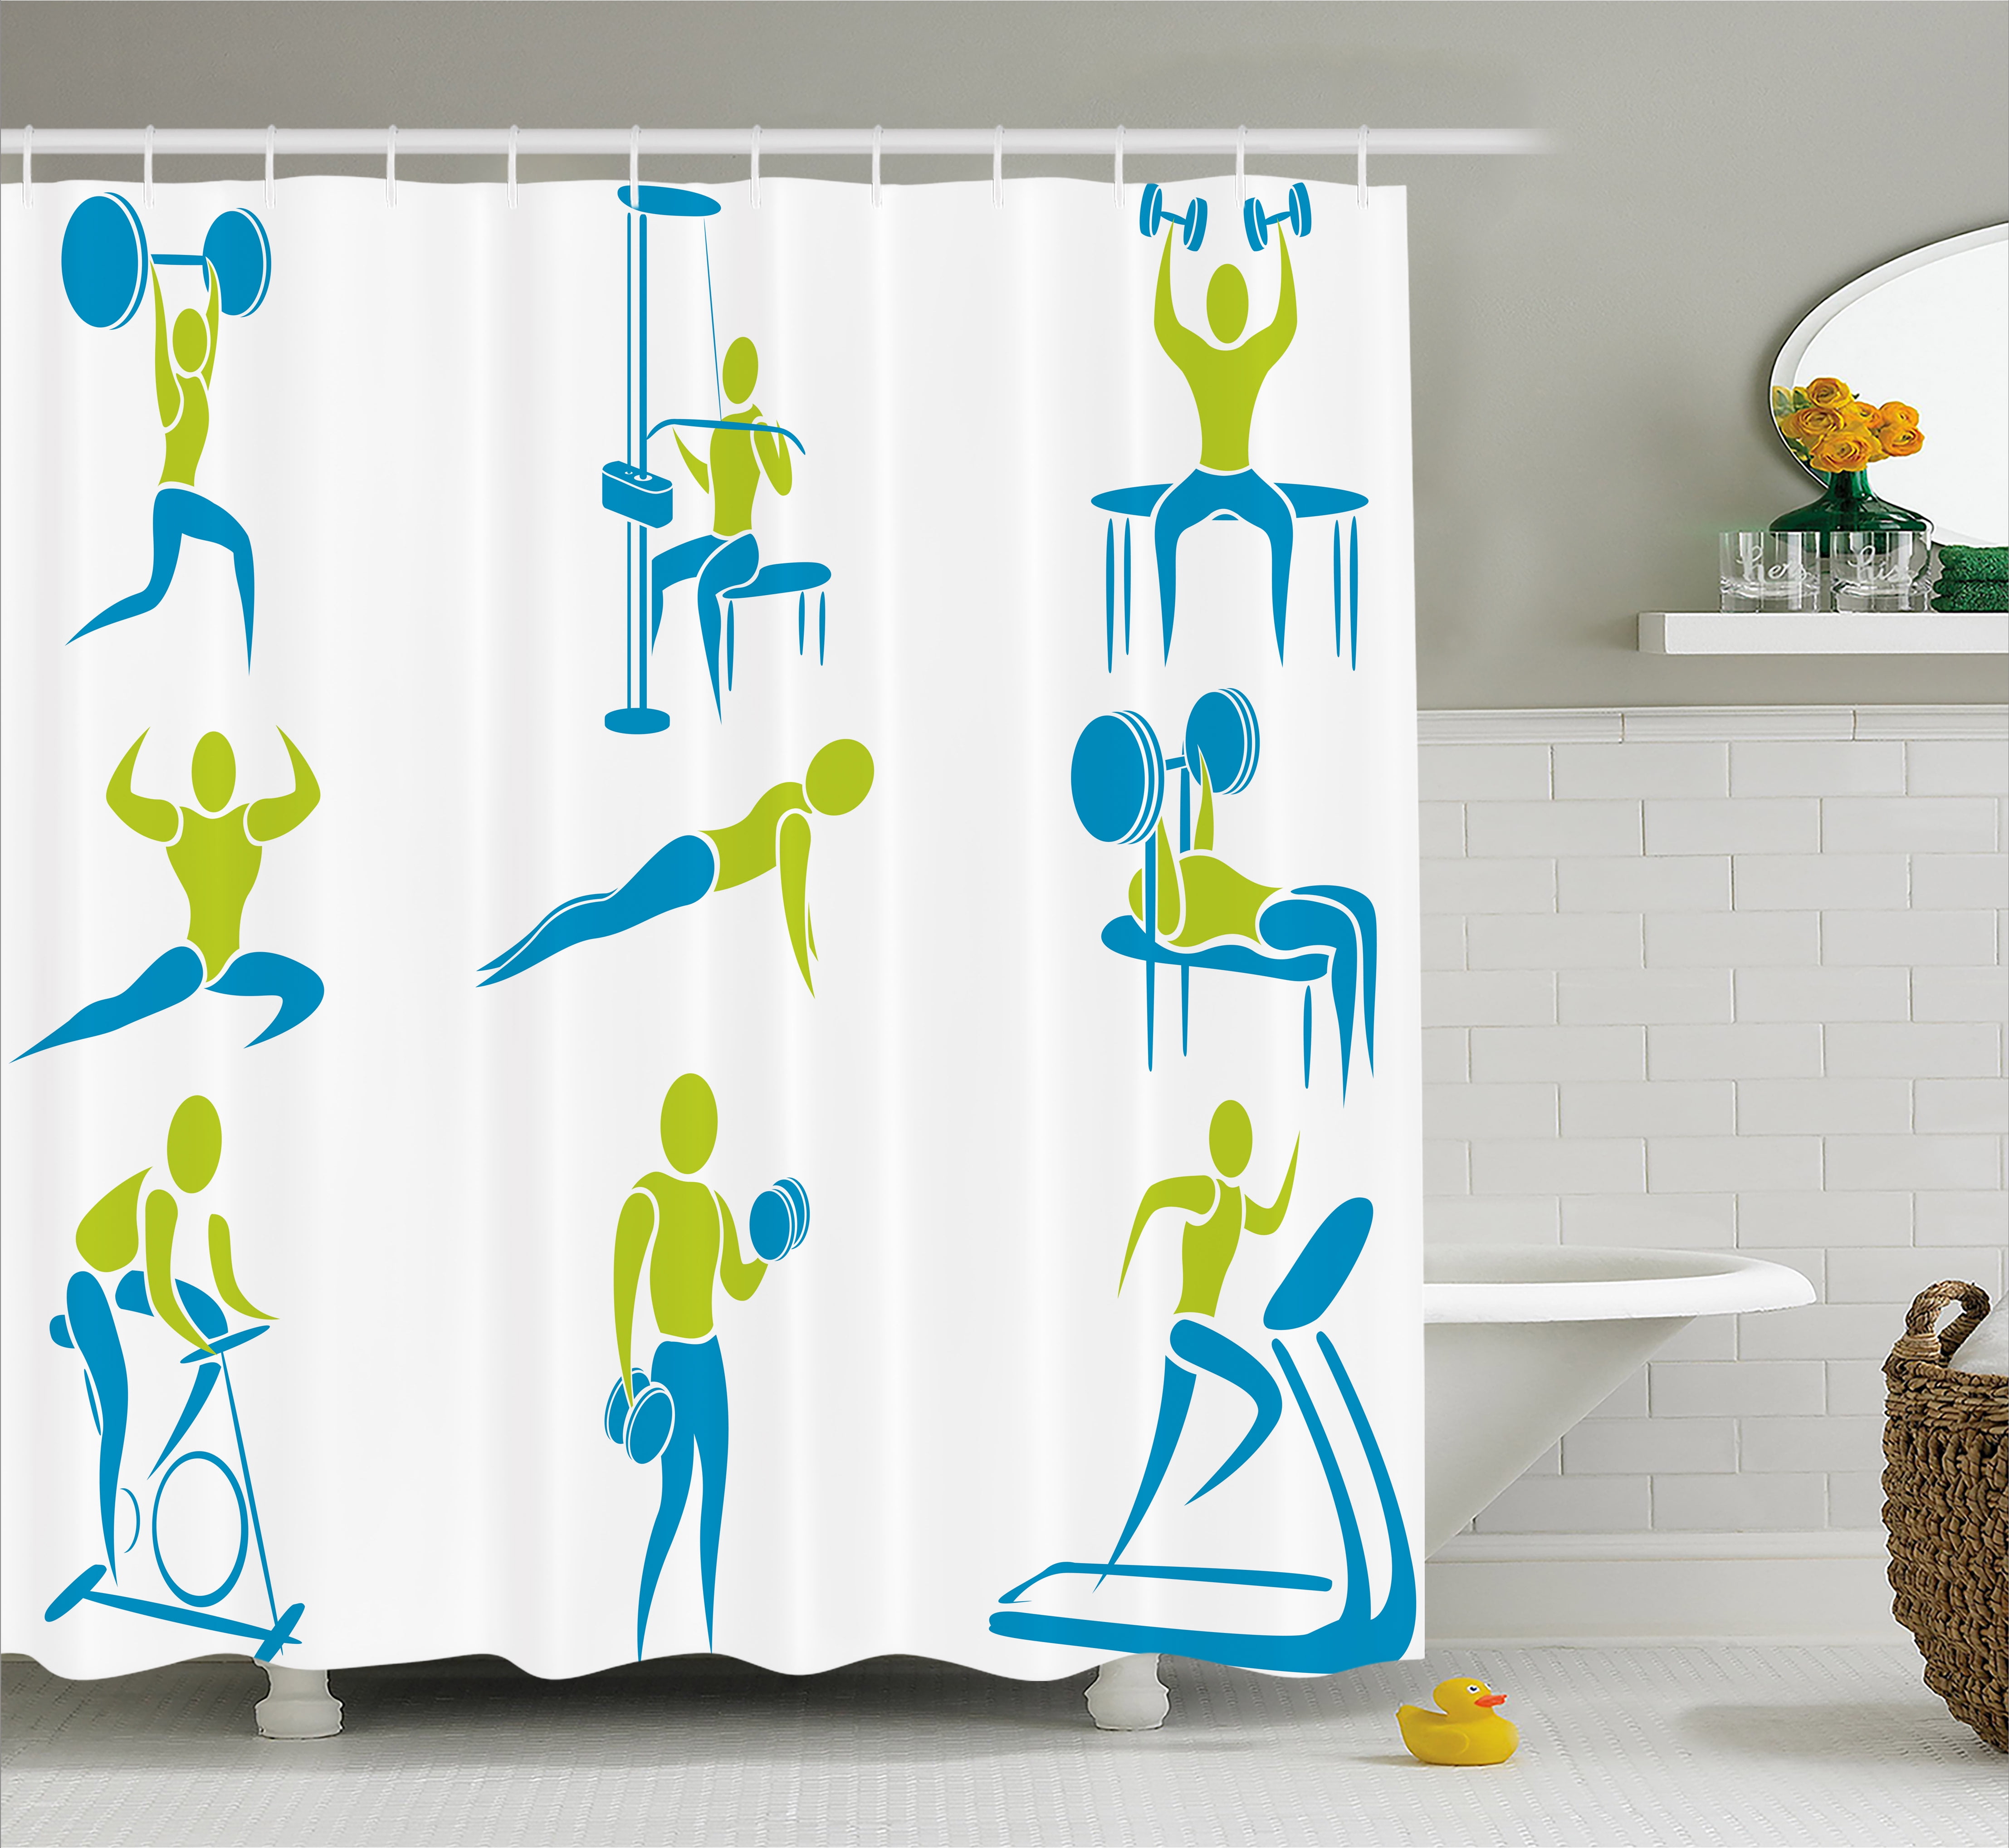 Fitness Shower Curtain, Set of Icons Showing Different Gym ...